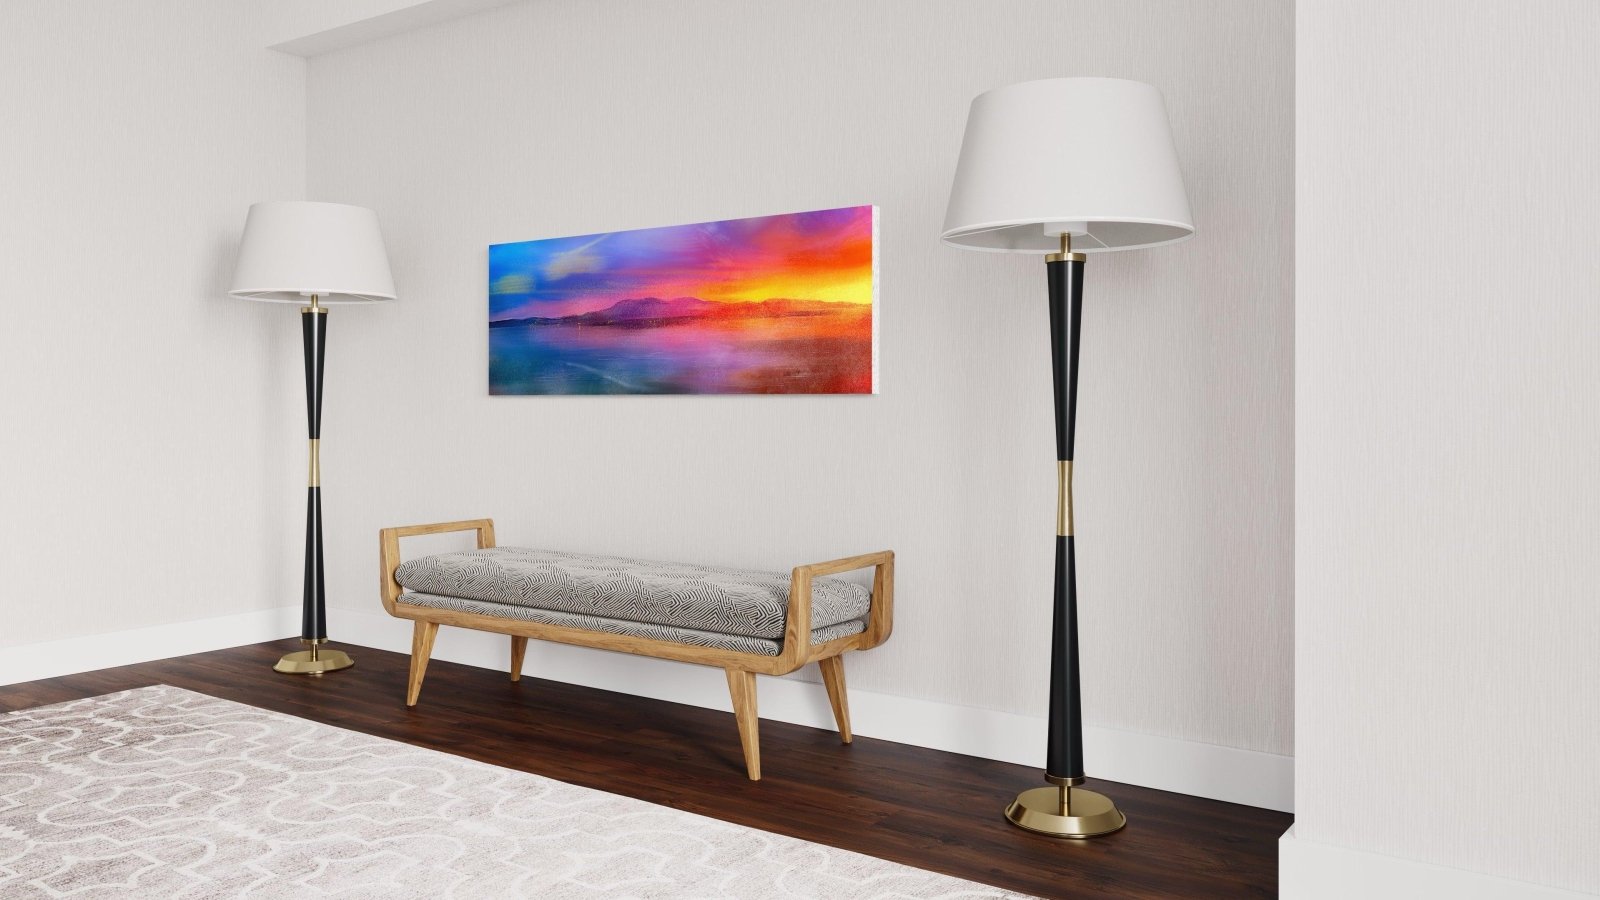 Arran Sunset Panoramic 60x20 inch Stretched Canvas Statement Wall Art-Statement Wall Art-Arran Art Gallery-Paintings, Prints, Homeware, Art Gifts From Scotland By Scottish Artist Kevin Hunter